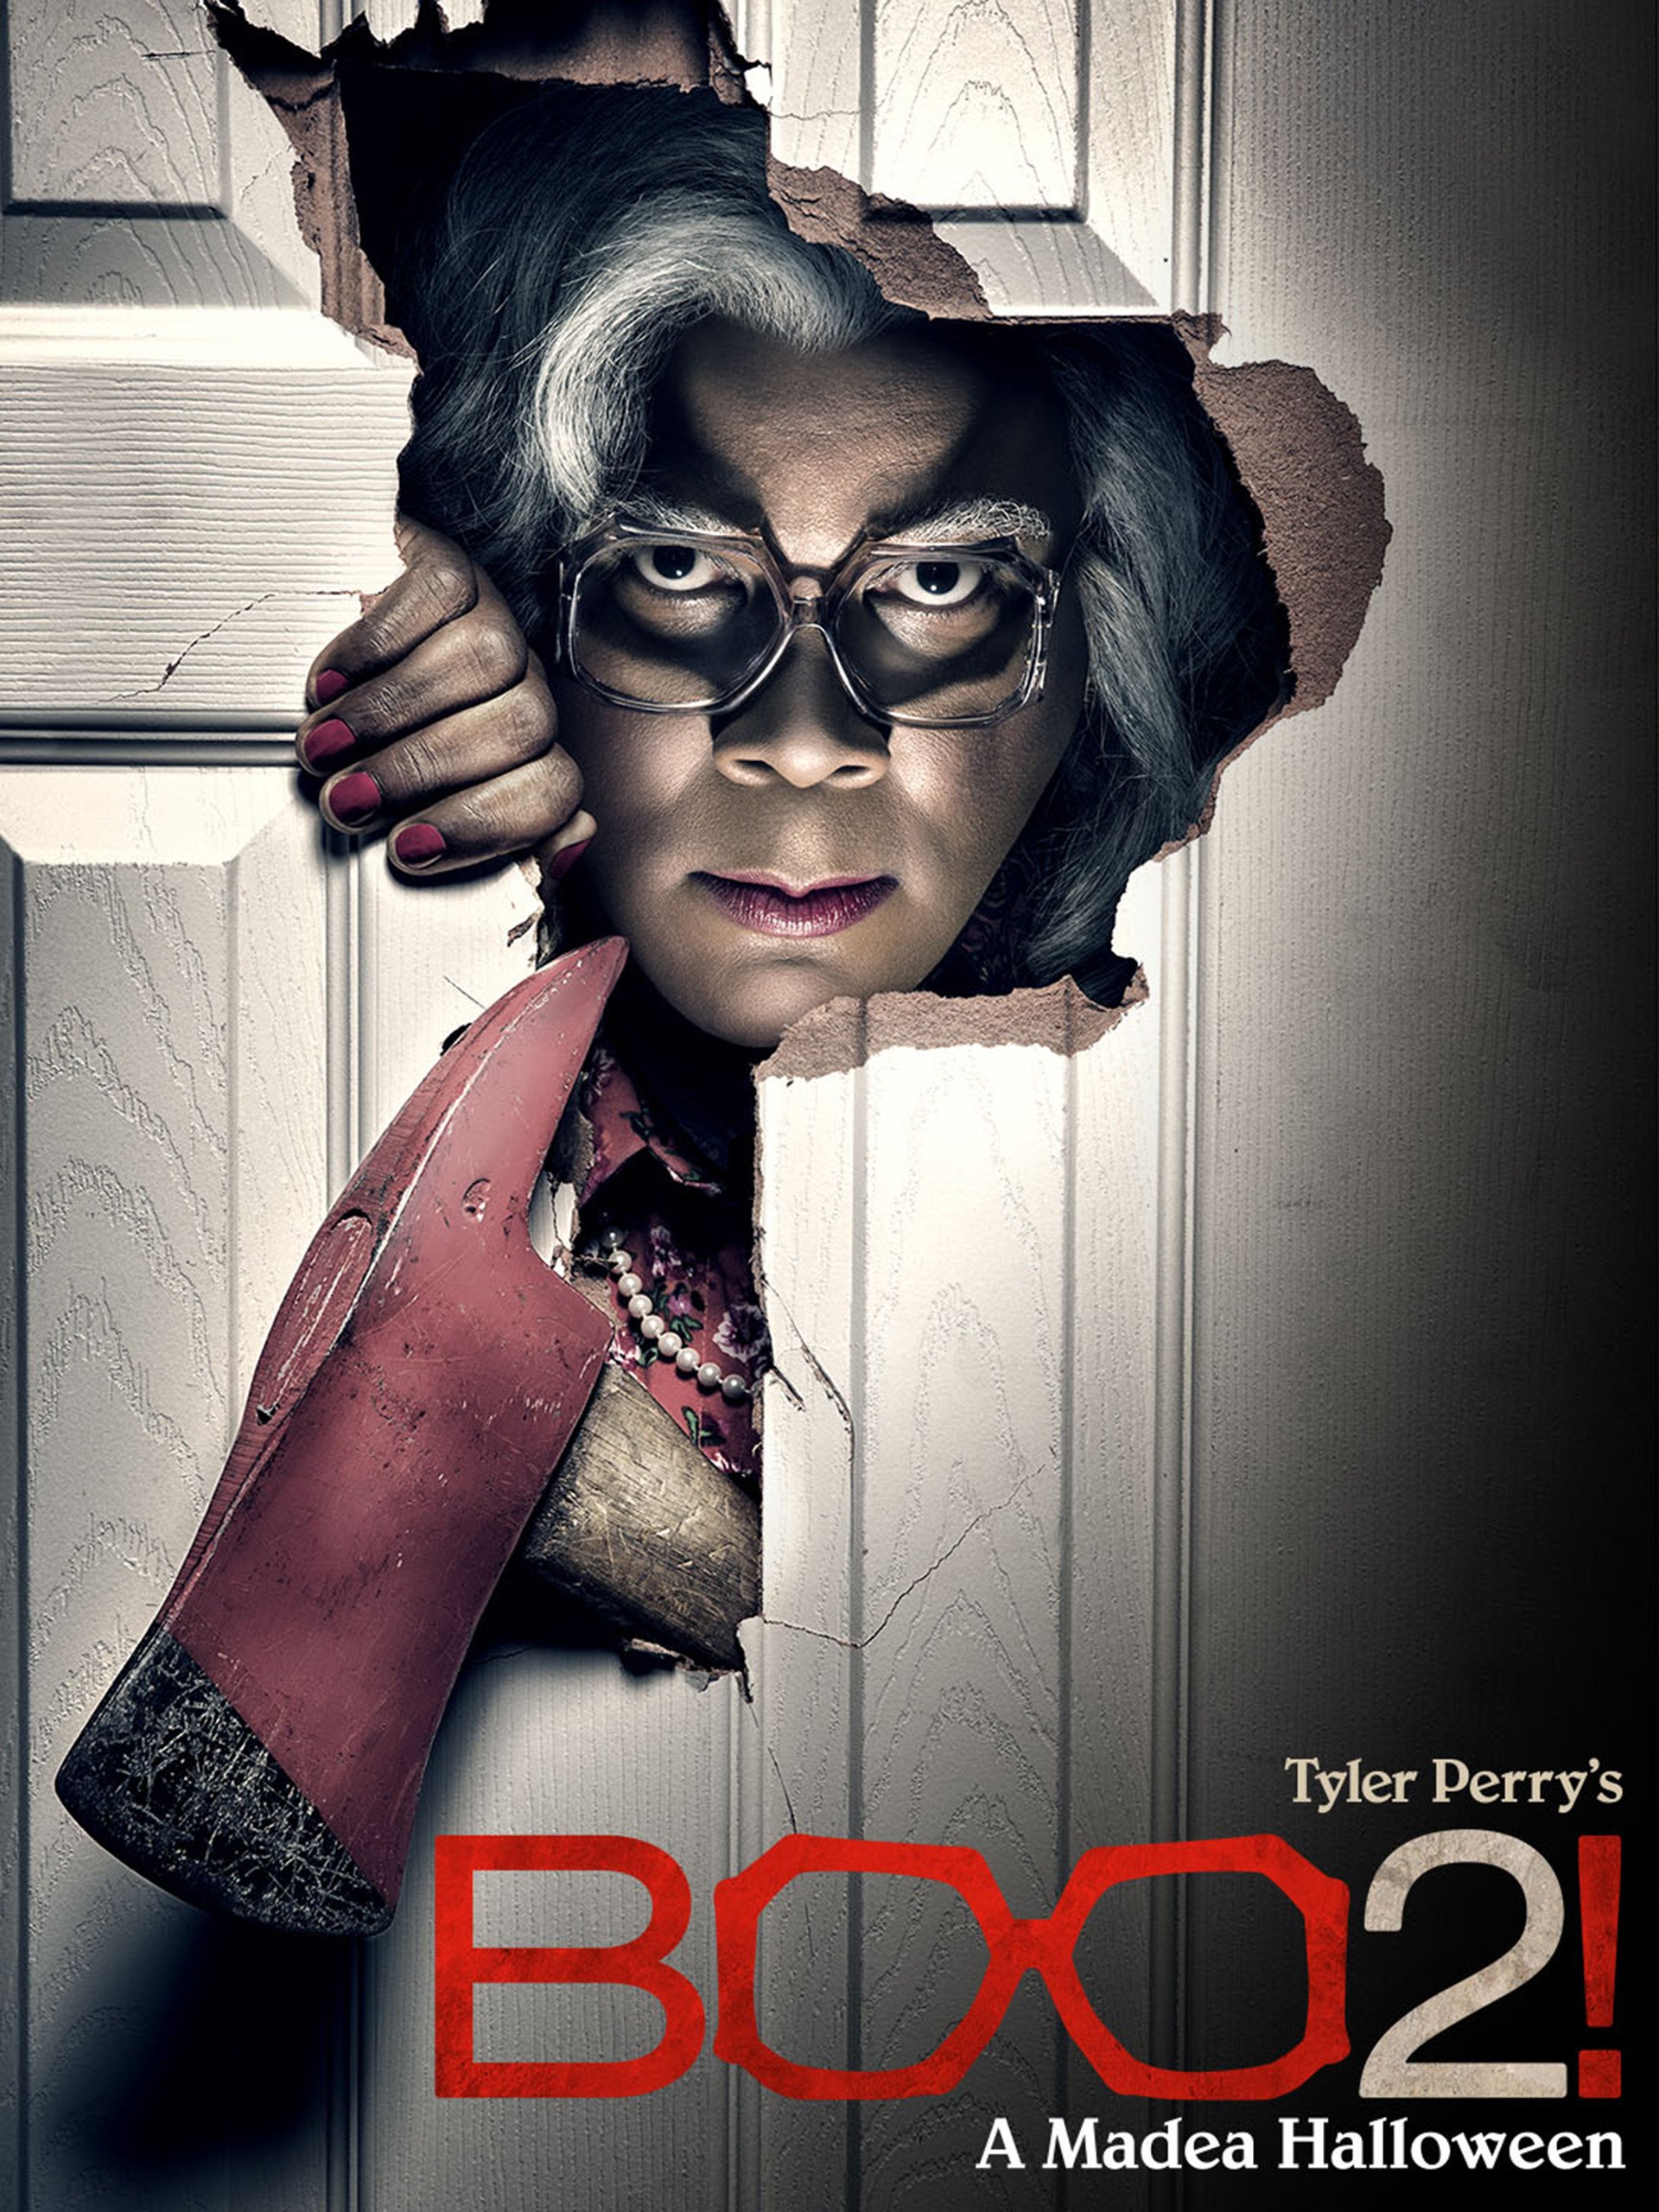 Watch Tyler Perry Plays Online Free